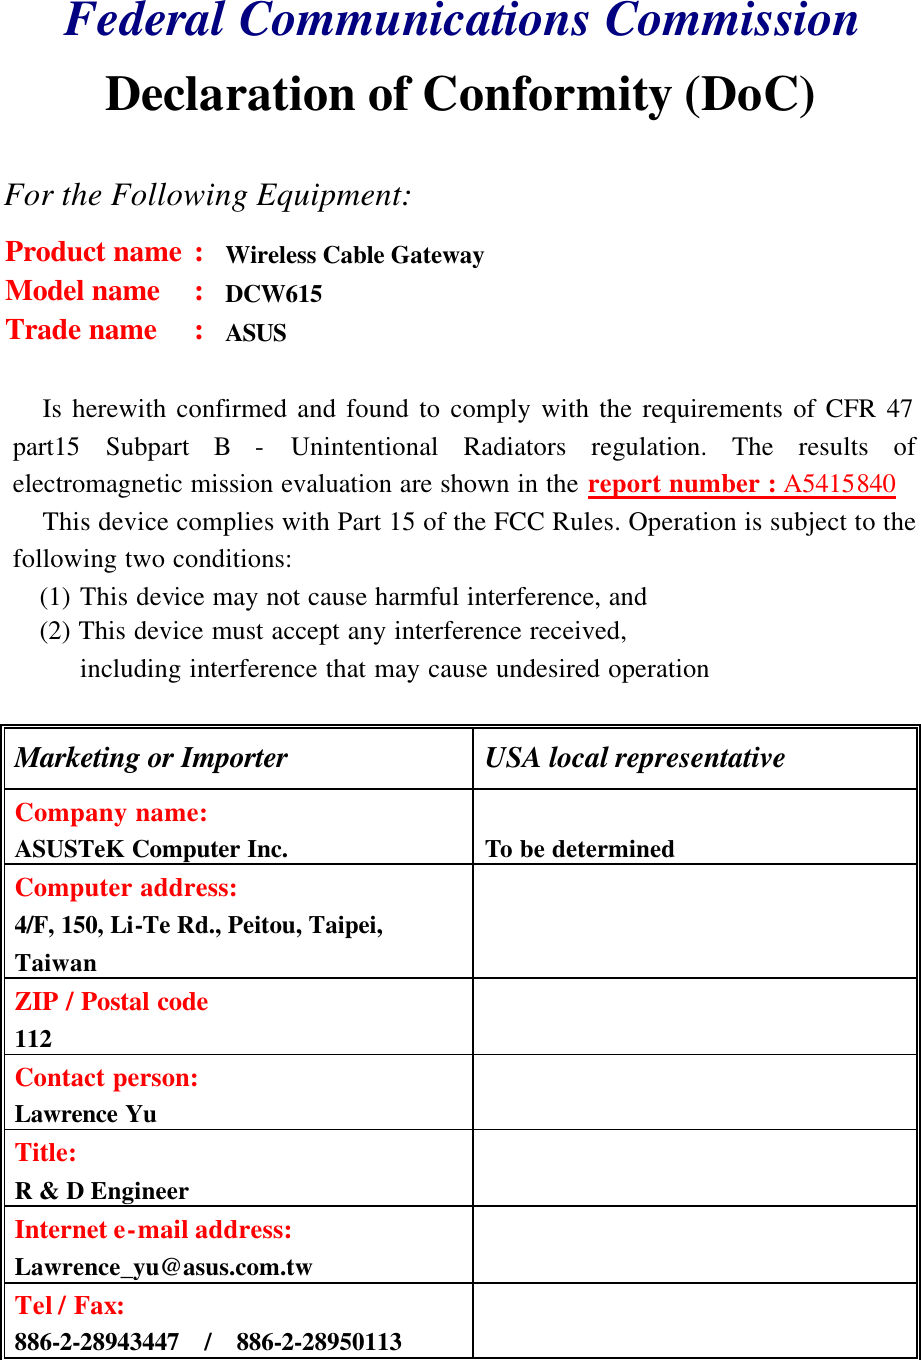 Federal Communications Commission Declaration of Conformity (DoC)  For the Following Equipment: Product name : Wireless Cable Gateway Model name : DCW615 Trade name : ASUS  Is herewith confirmed and found to comply with the requirements of CFR 47 part15 Subpart B - Unintentional Radiators regulation. The results of electromagnetic mission evaluation are shown in the report number : A5415840 This device complies with Part 15 of the FCC Rules. Operation is subject to the following two conditions: (1) This device may not cause harmful interference, and (2) This device must accept any interference received, including interference that may cause undesired operation  Marketing or Importer USA local representative Company name:  ASUSTeK Computer Inc. To be determined Computer address:  4/F, 150, Li-Te Rd., Peitou, Taipei, Taiwan       ZIP / Postal code  112       Contact person:  Lawrence Yu       Title:  R &amp; D Engineer       Internet e-mail address:  Lawrence_yu@asus.com.tw       Tel / Fax:  886-2-28943447  /  886-2-28950113        